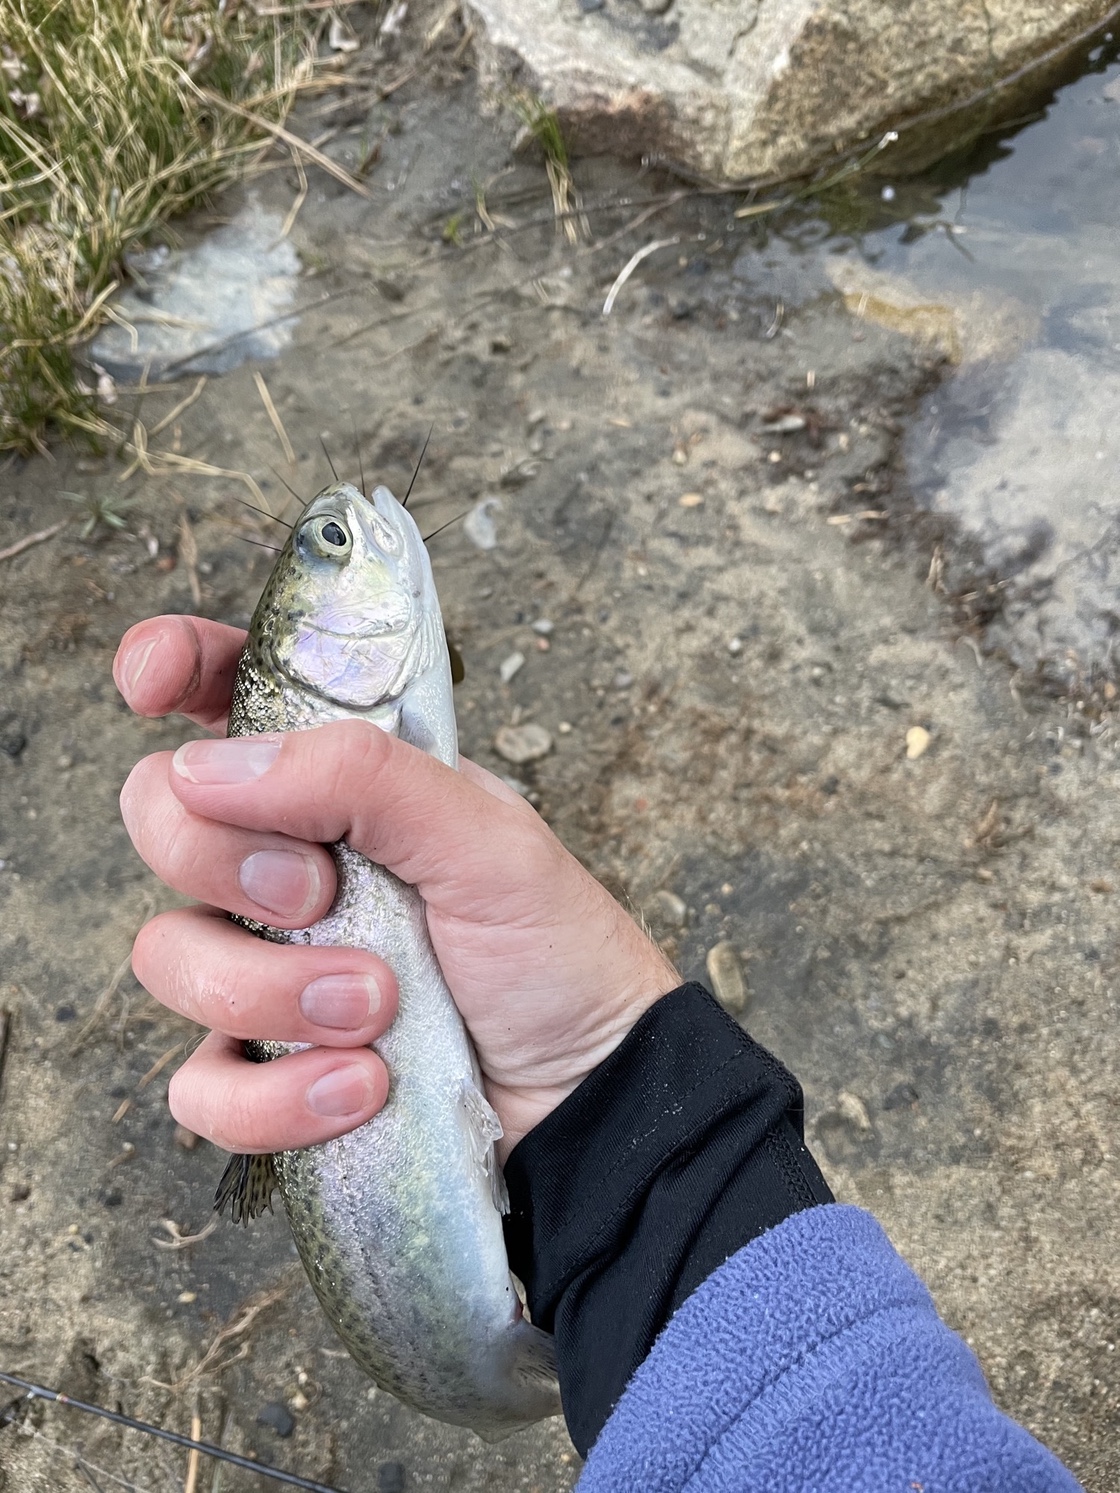 A rainbow trout caught on the Kern River